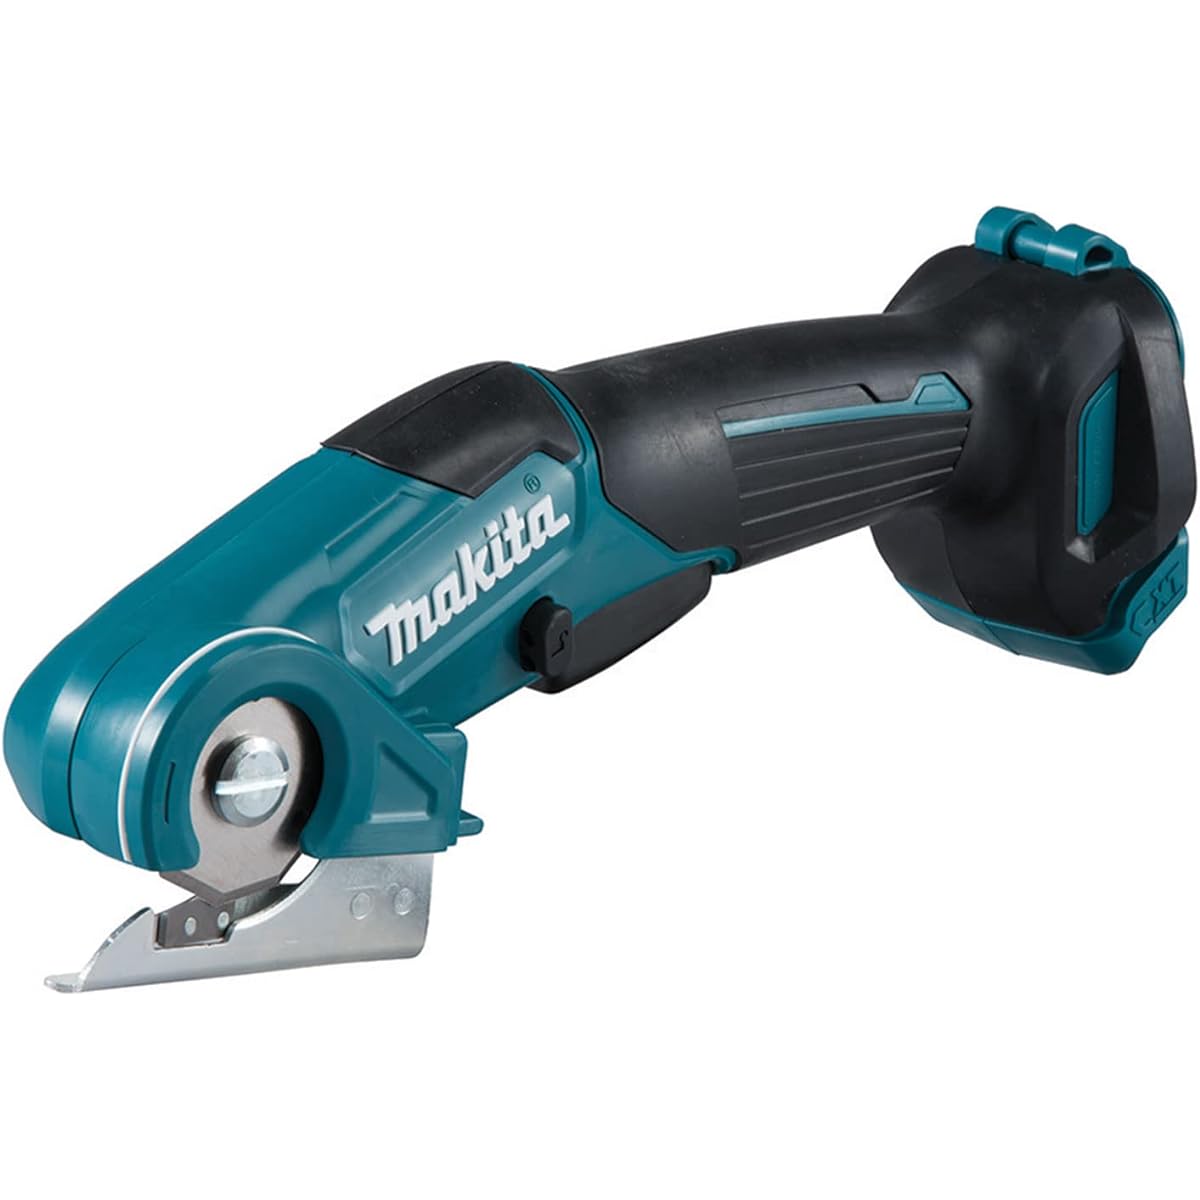 Makita Rechargeable Multi Cutter 10.8V Battery/Charger/Case Sold Separately CP100DZ